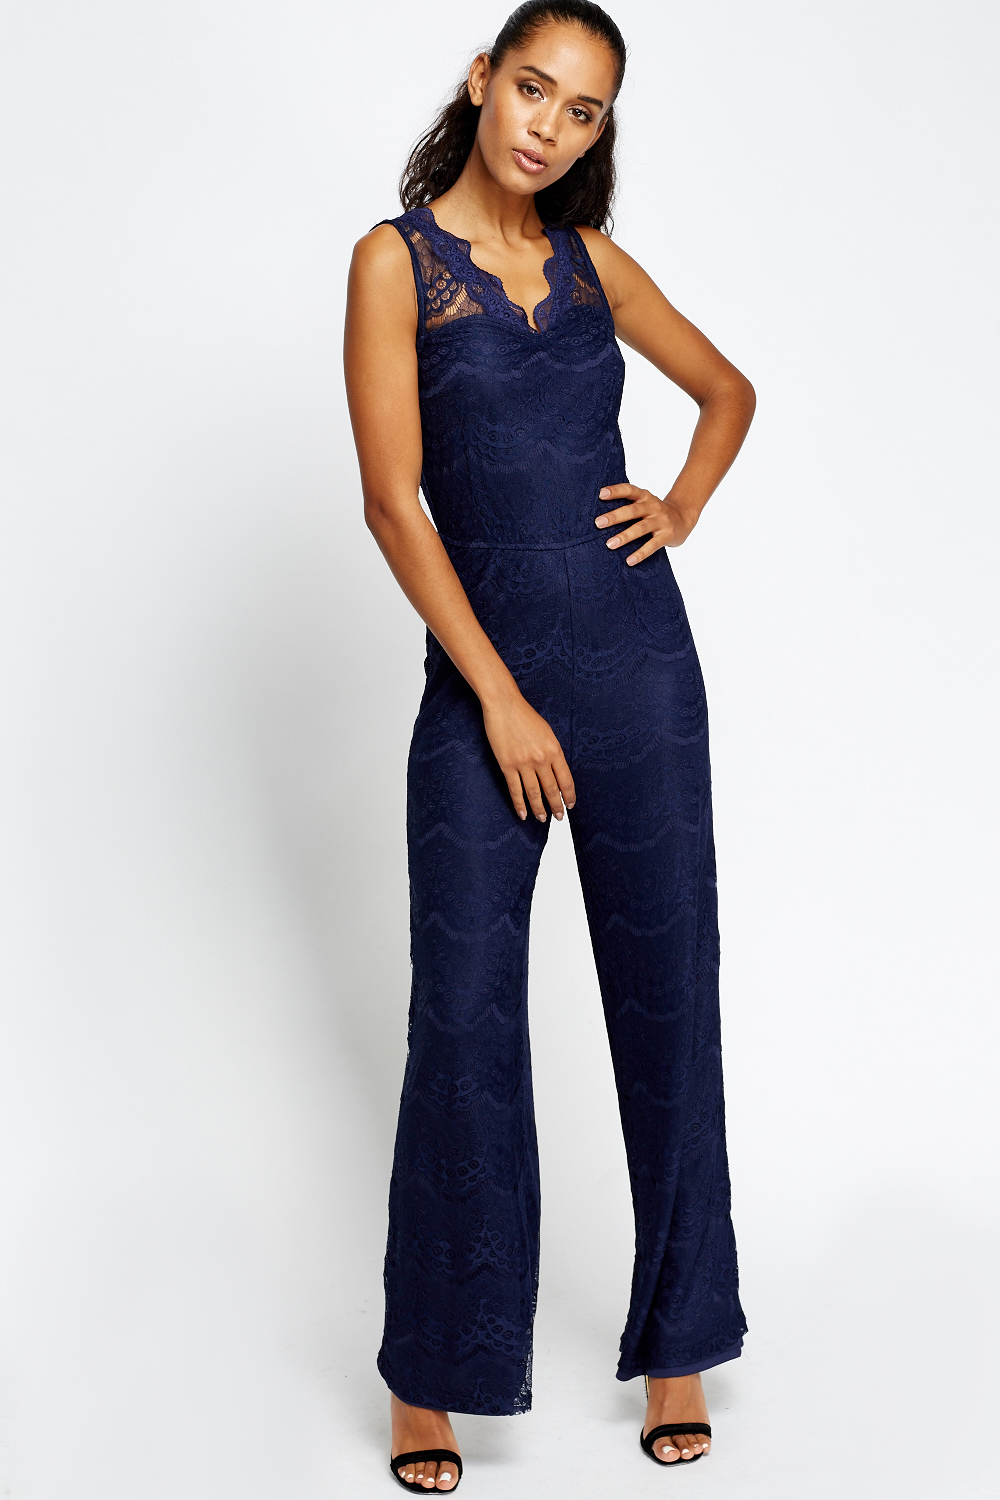 Sweetheart Lace Overlay Navy Jumpsuit - Just $6